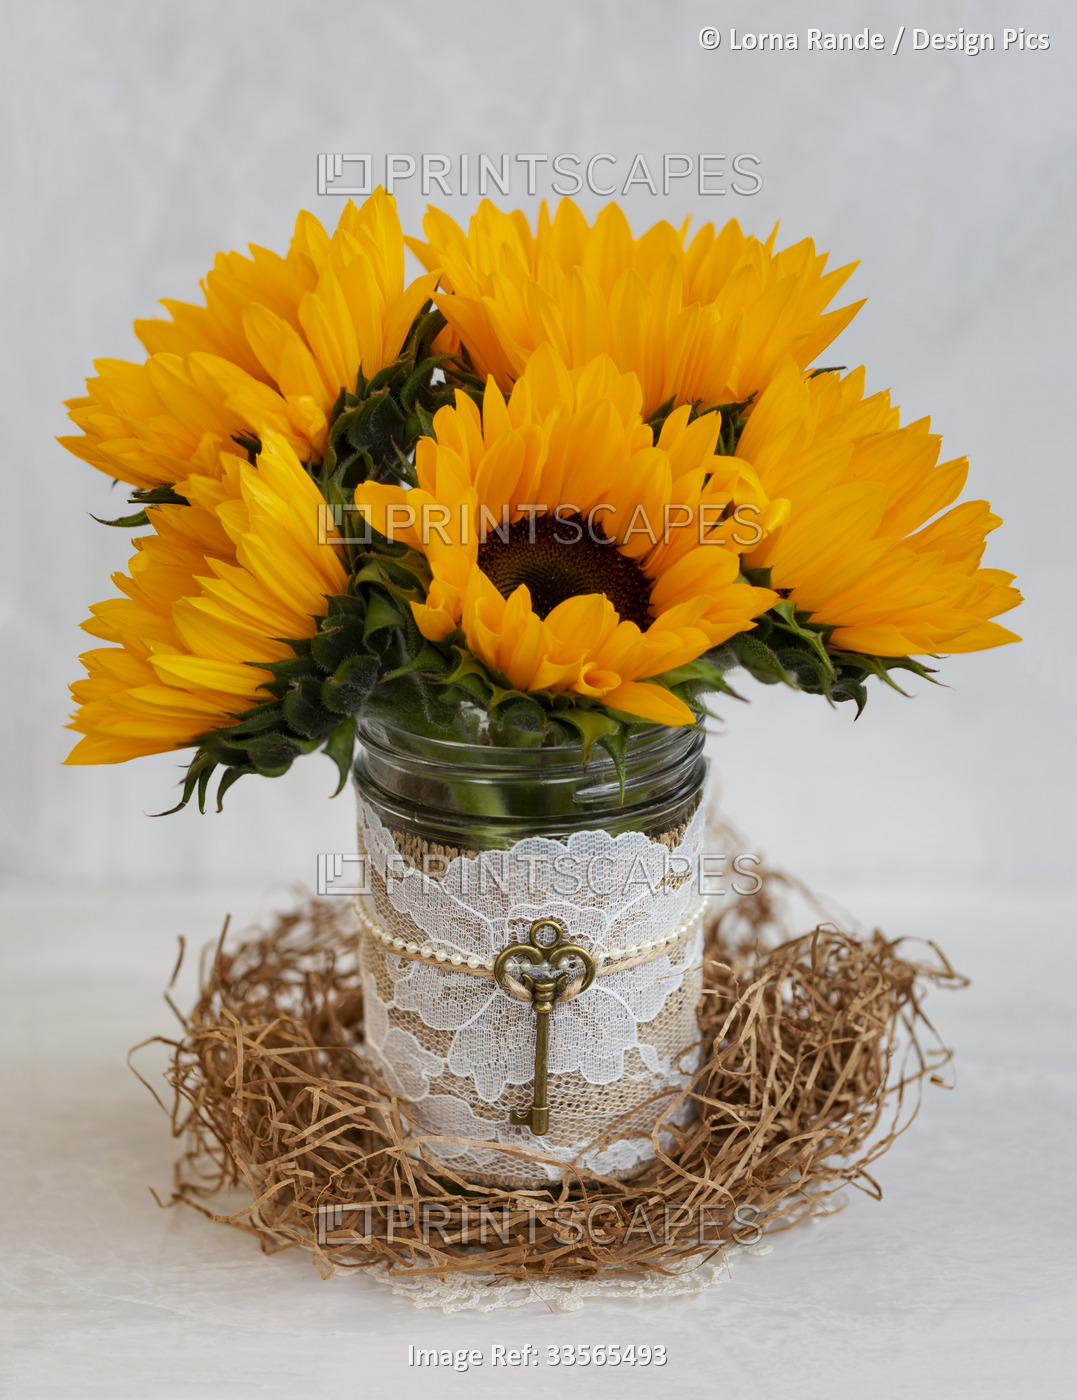 Sunflower bouquet in a decorative jar with lace, pearls and a vintage key; ...